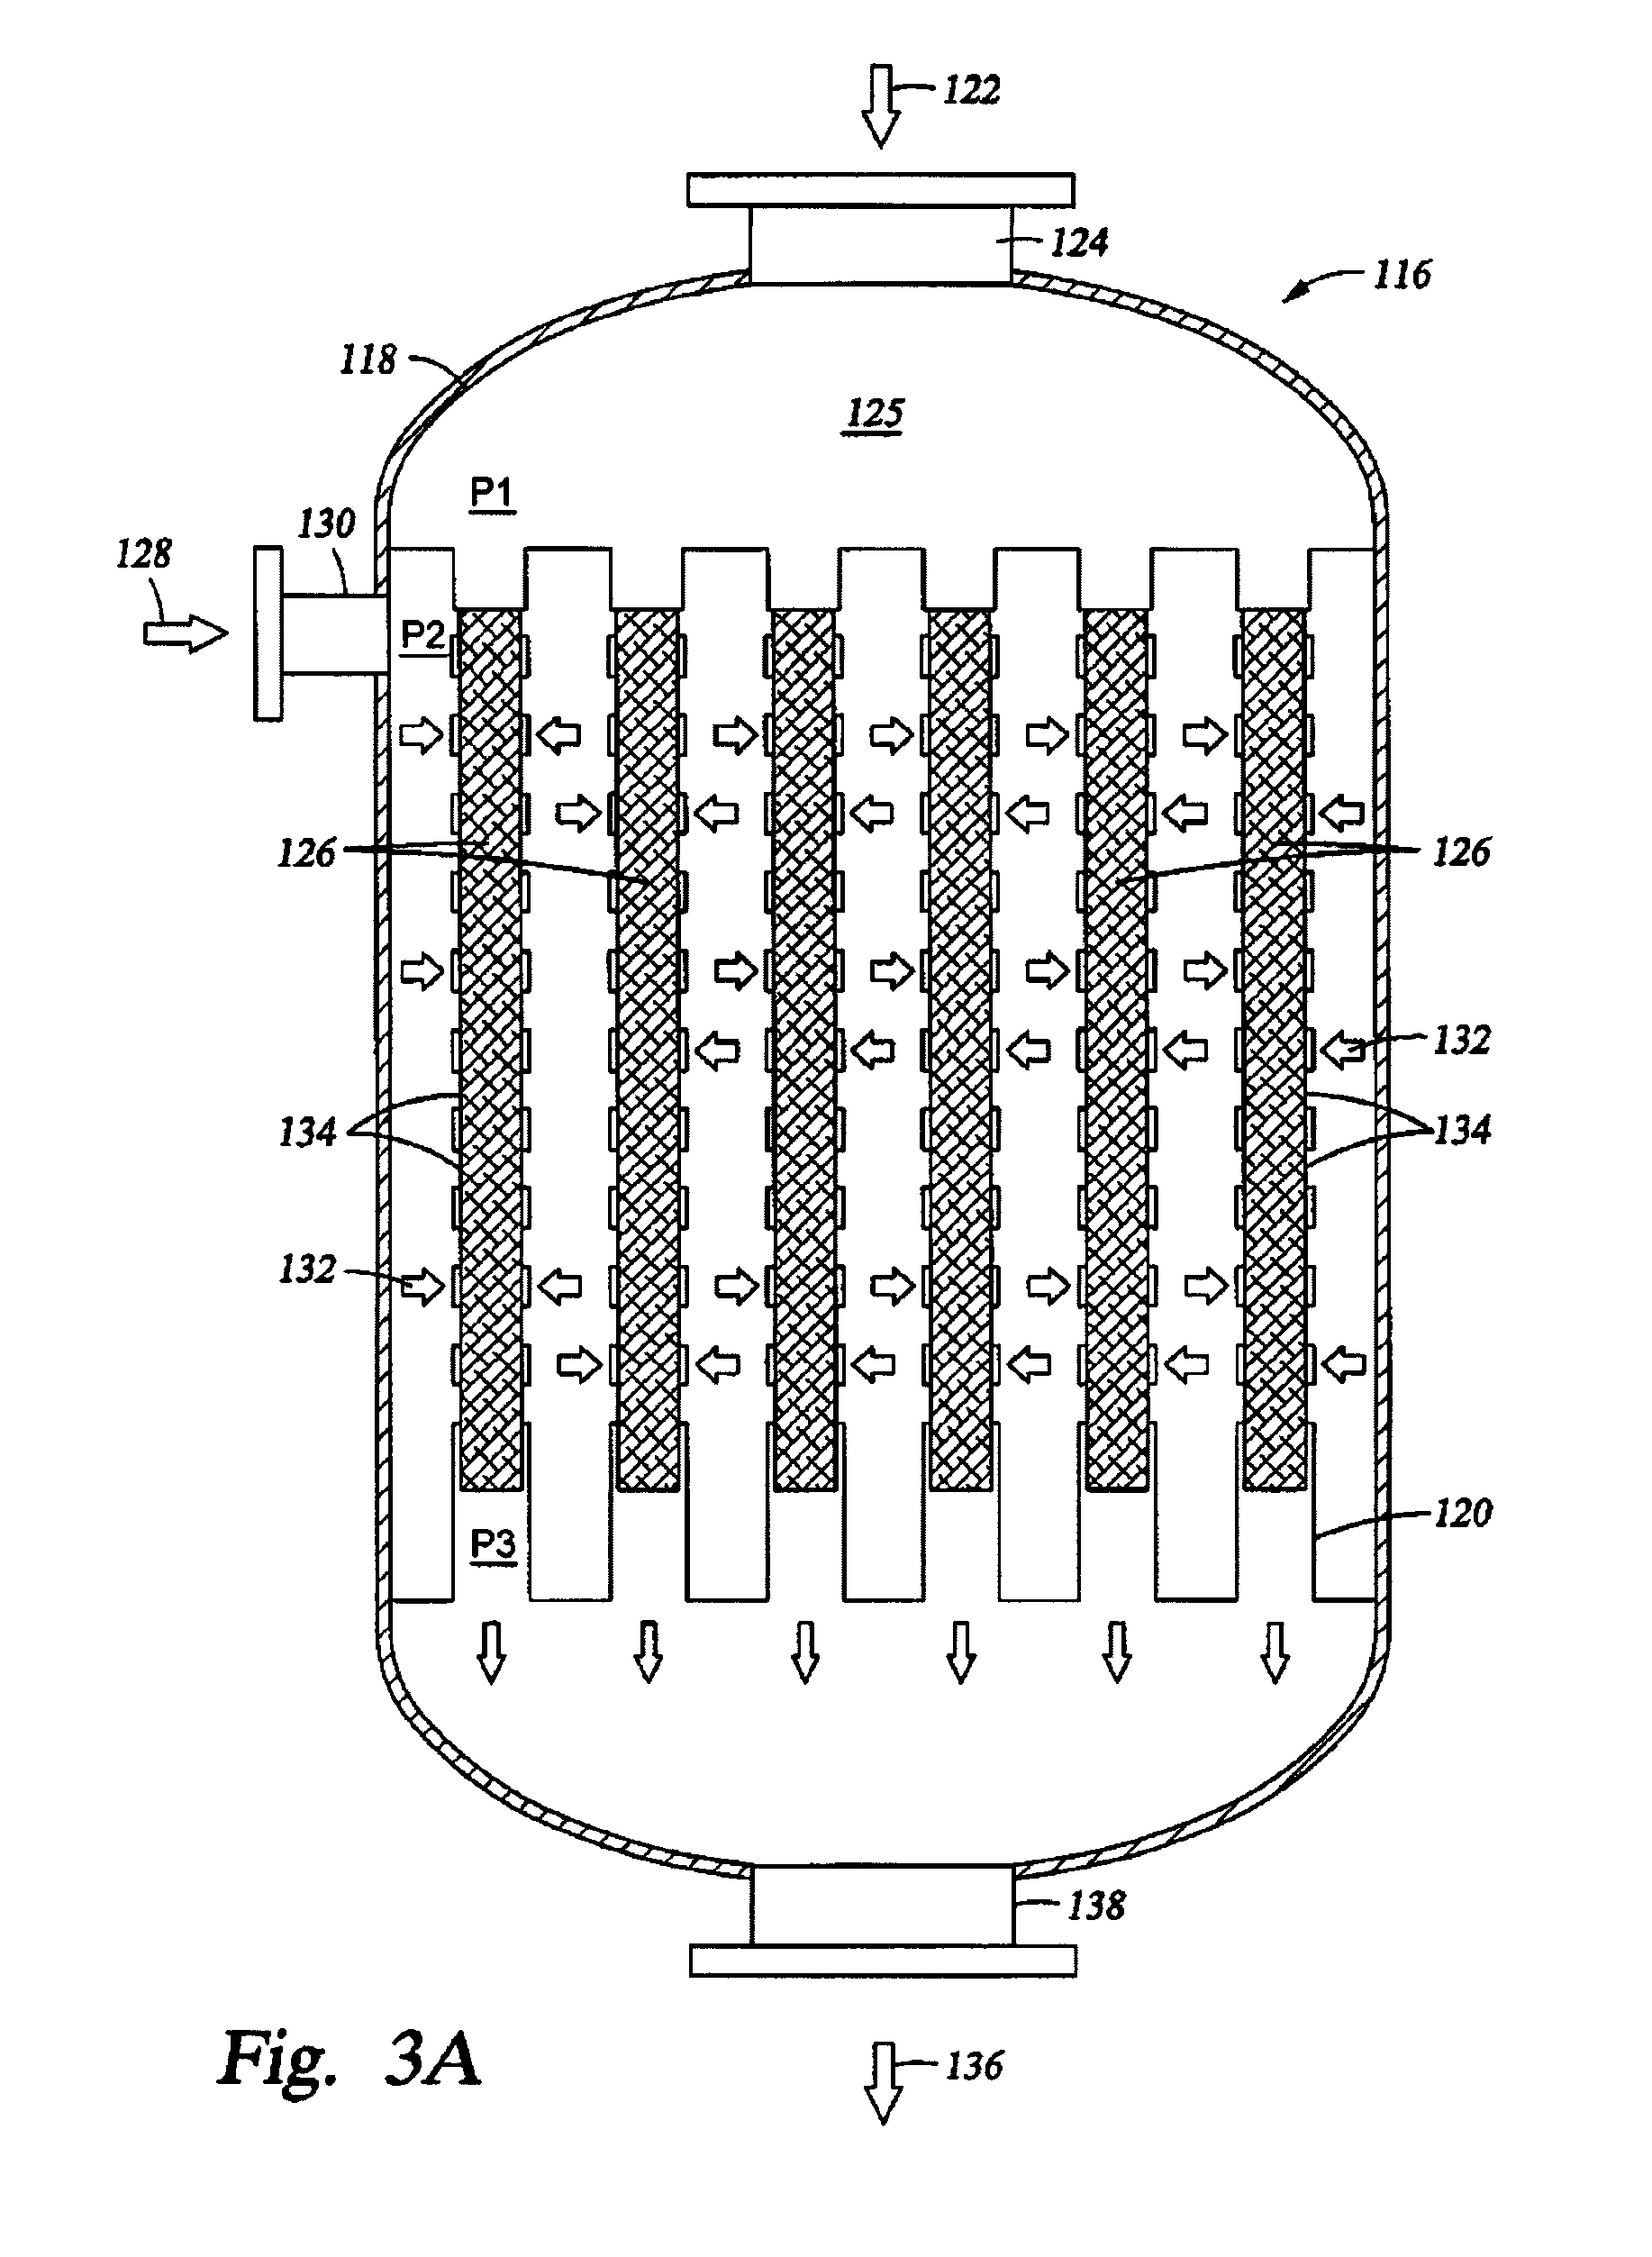 Synthesis gas process comprising partial oxidation using controlled and optimized temperature profile